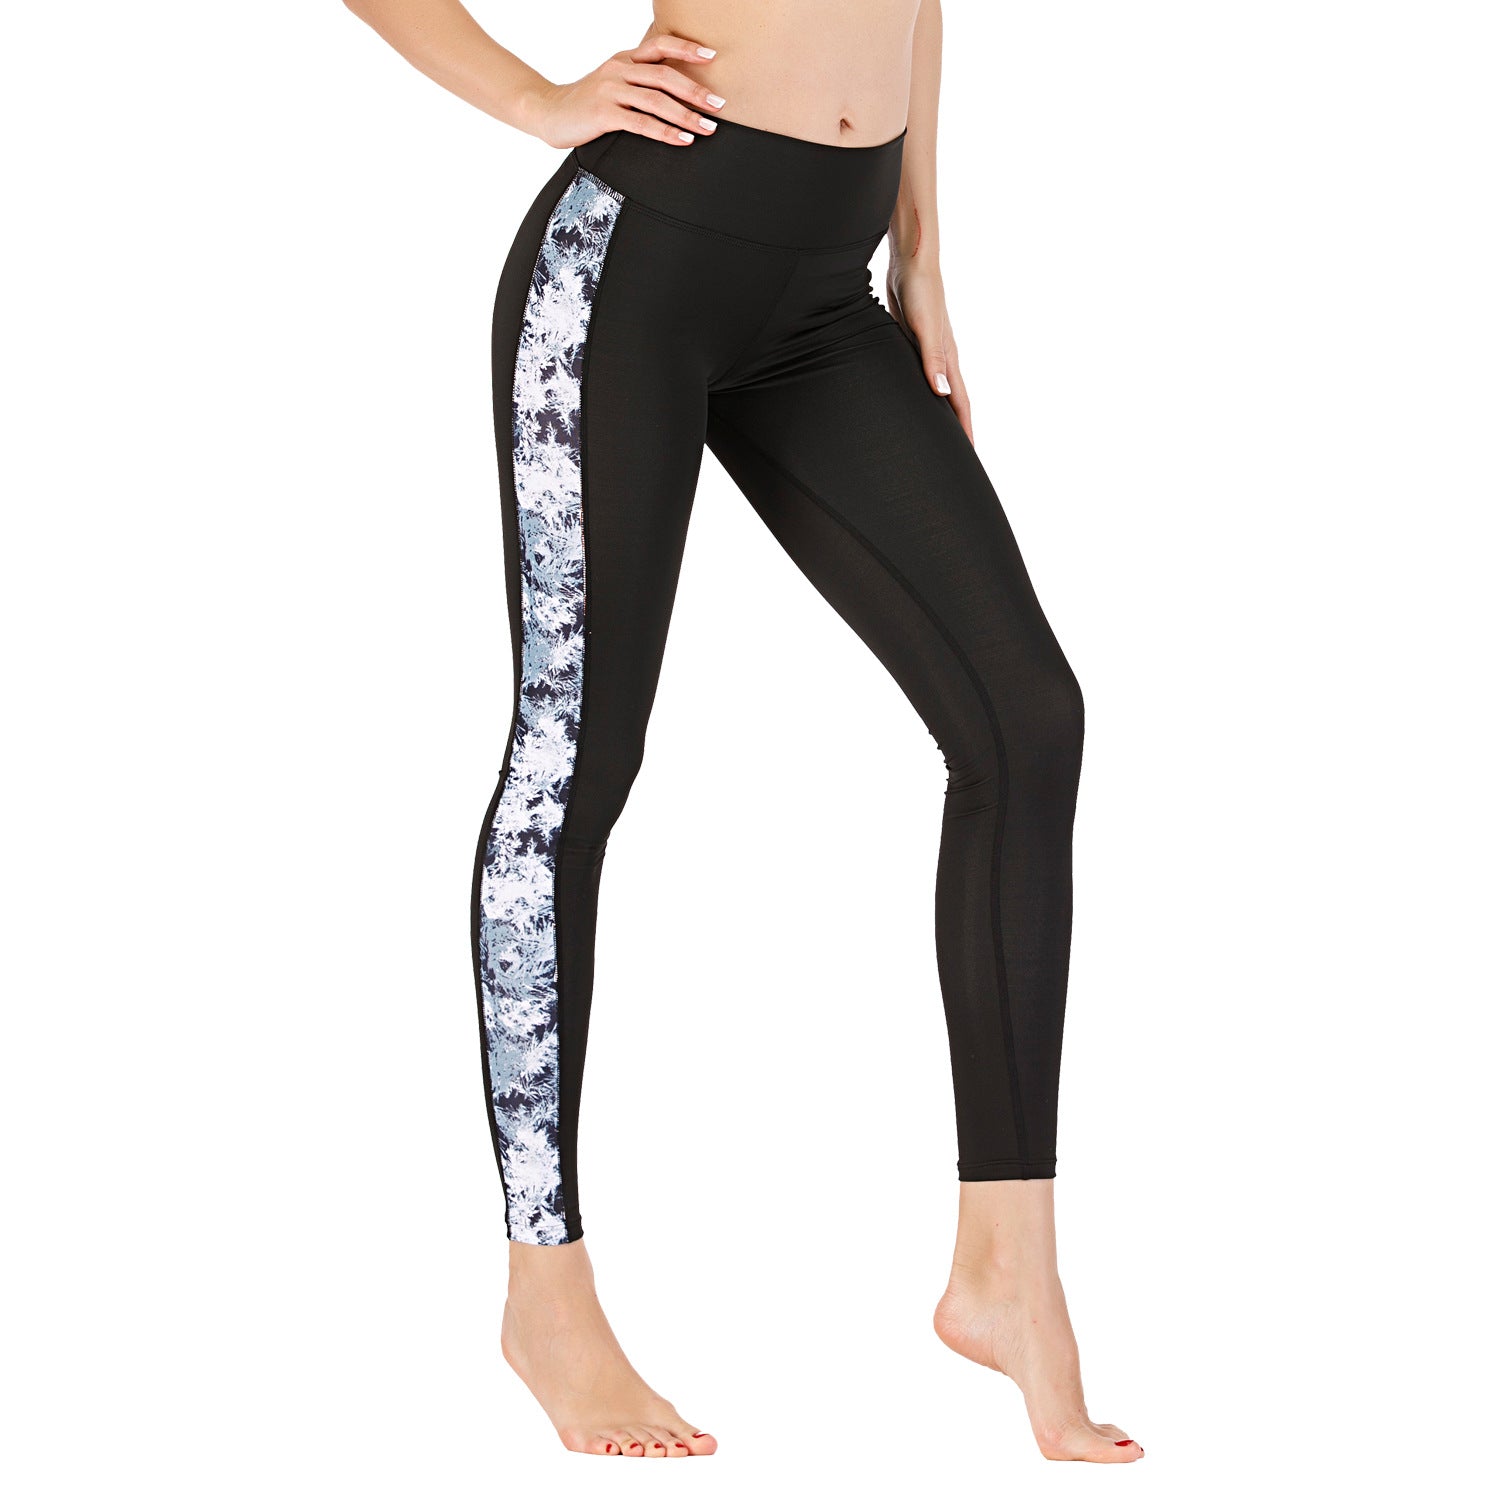 New Exercise Running Floral Yoga Suits Activewear for Keep Healthy-Leggings-S-Free Shipping at meselling99